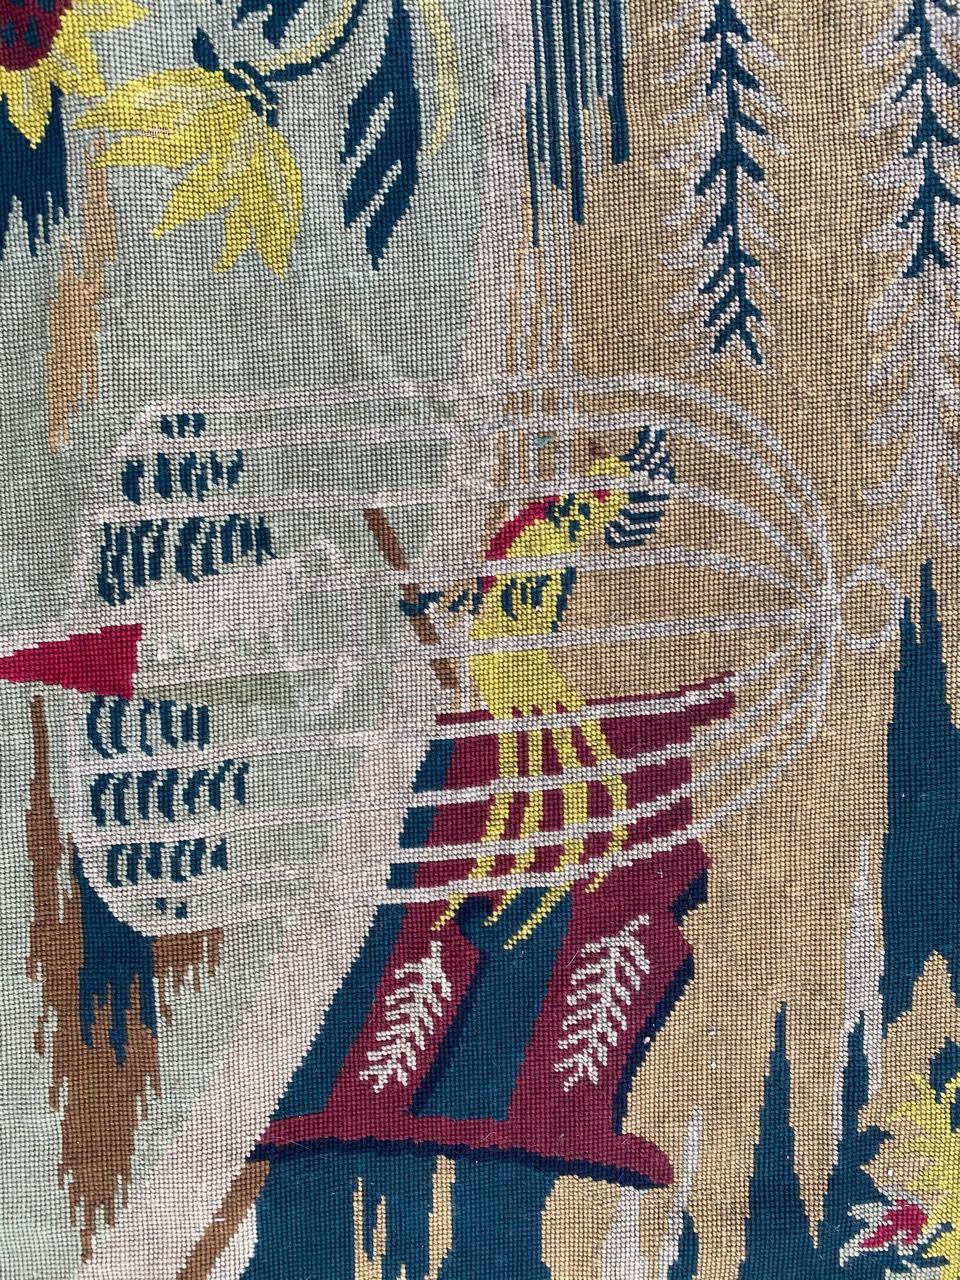 Nice midcentury tapestry with an Art Deco design and beautiful colors with green, red and yellow, entirely hand embroidered with needlepoint method with wool on cotton foundation.